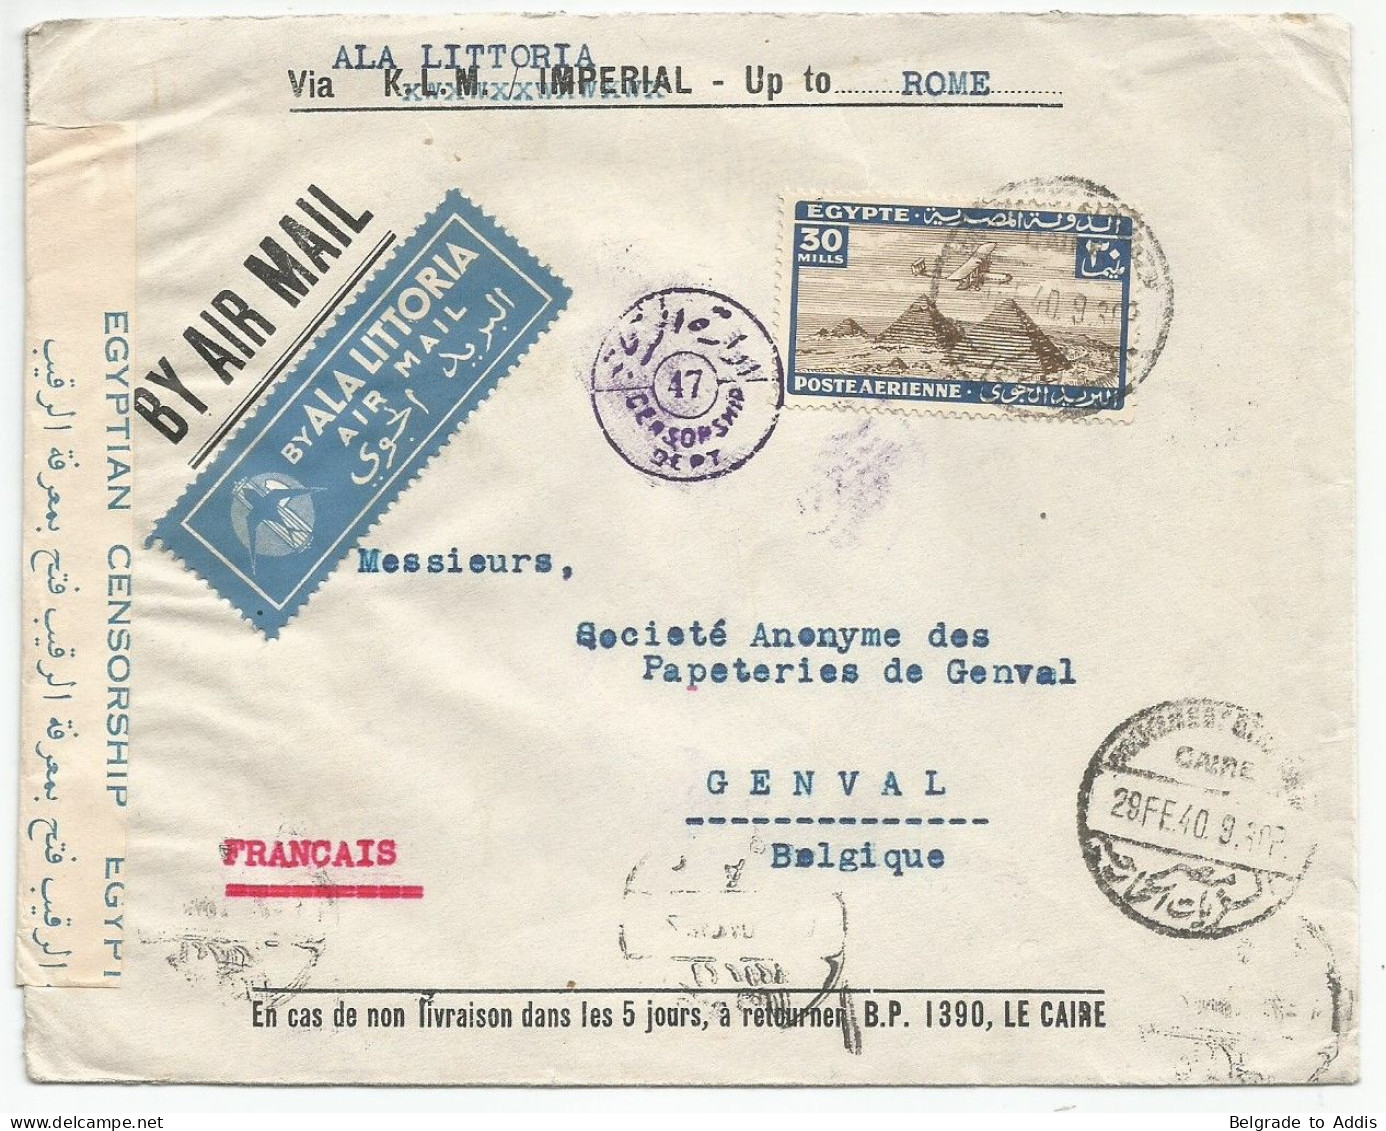 Egypt Air Mail Censored Cover Sent By ALA LITTORIA Via Roma Italy To Belgium 1940 - Luftpost